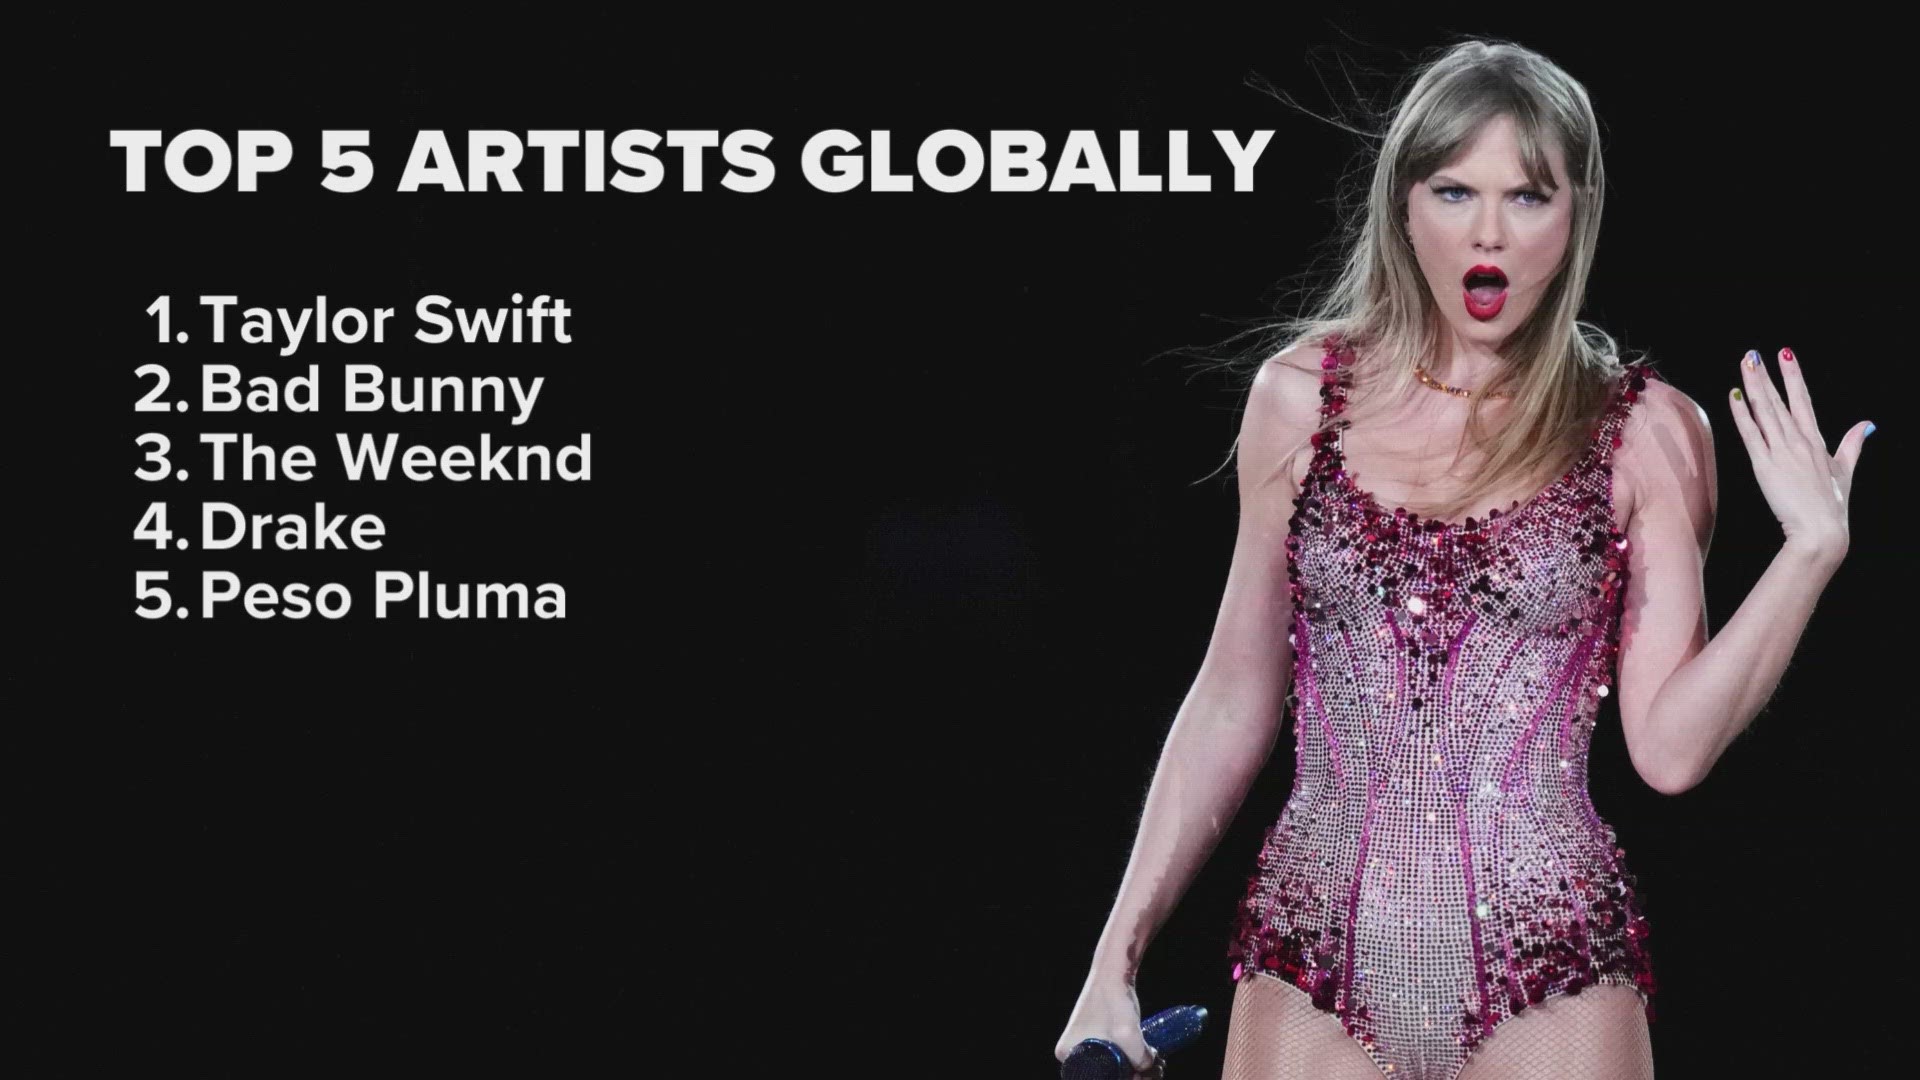 According to Spotify Wrapped, Swift raki in more than 26.1 billion streams since January 1.